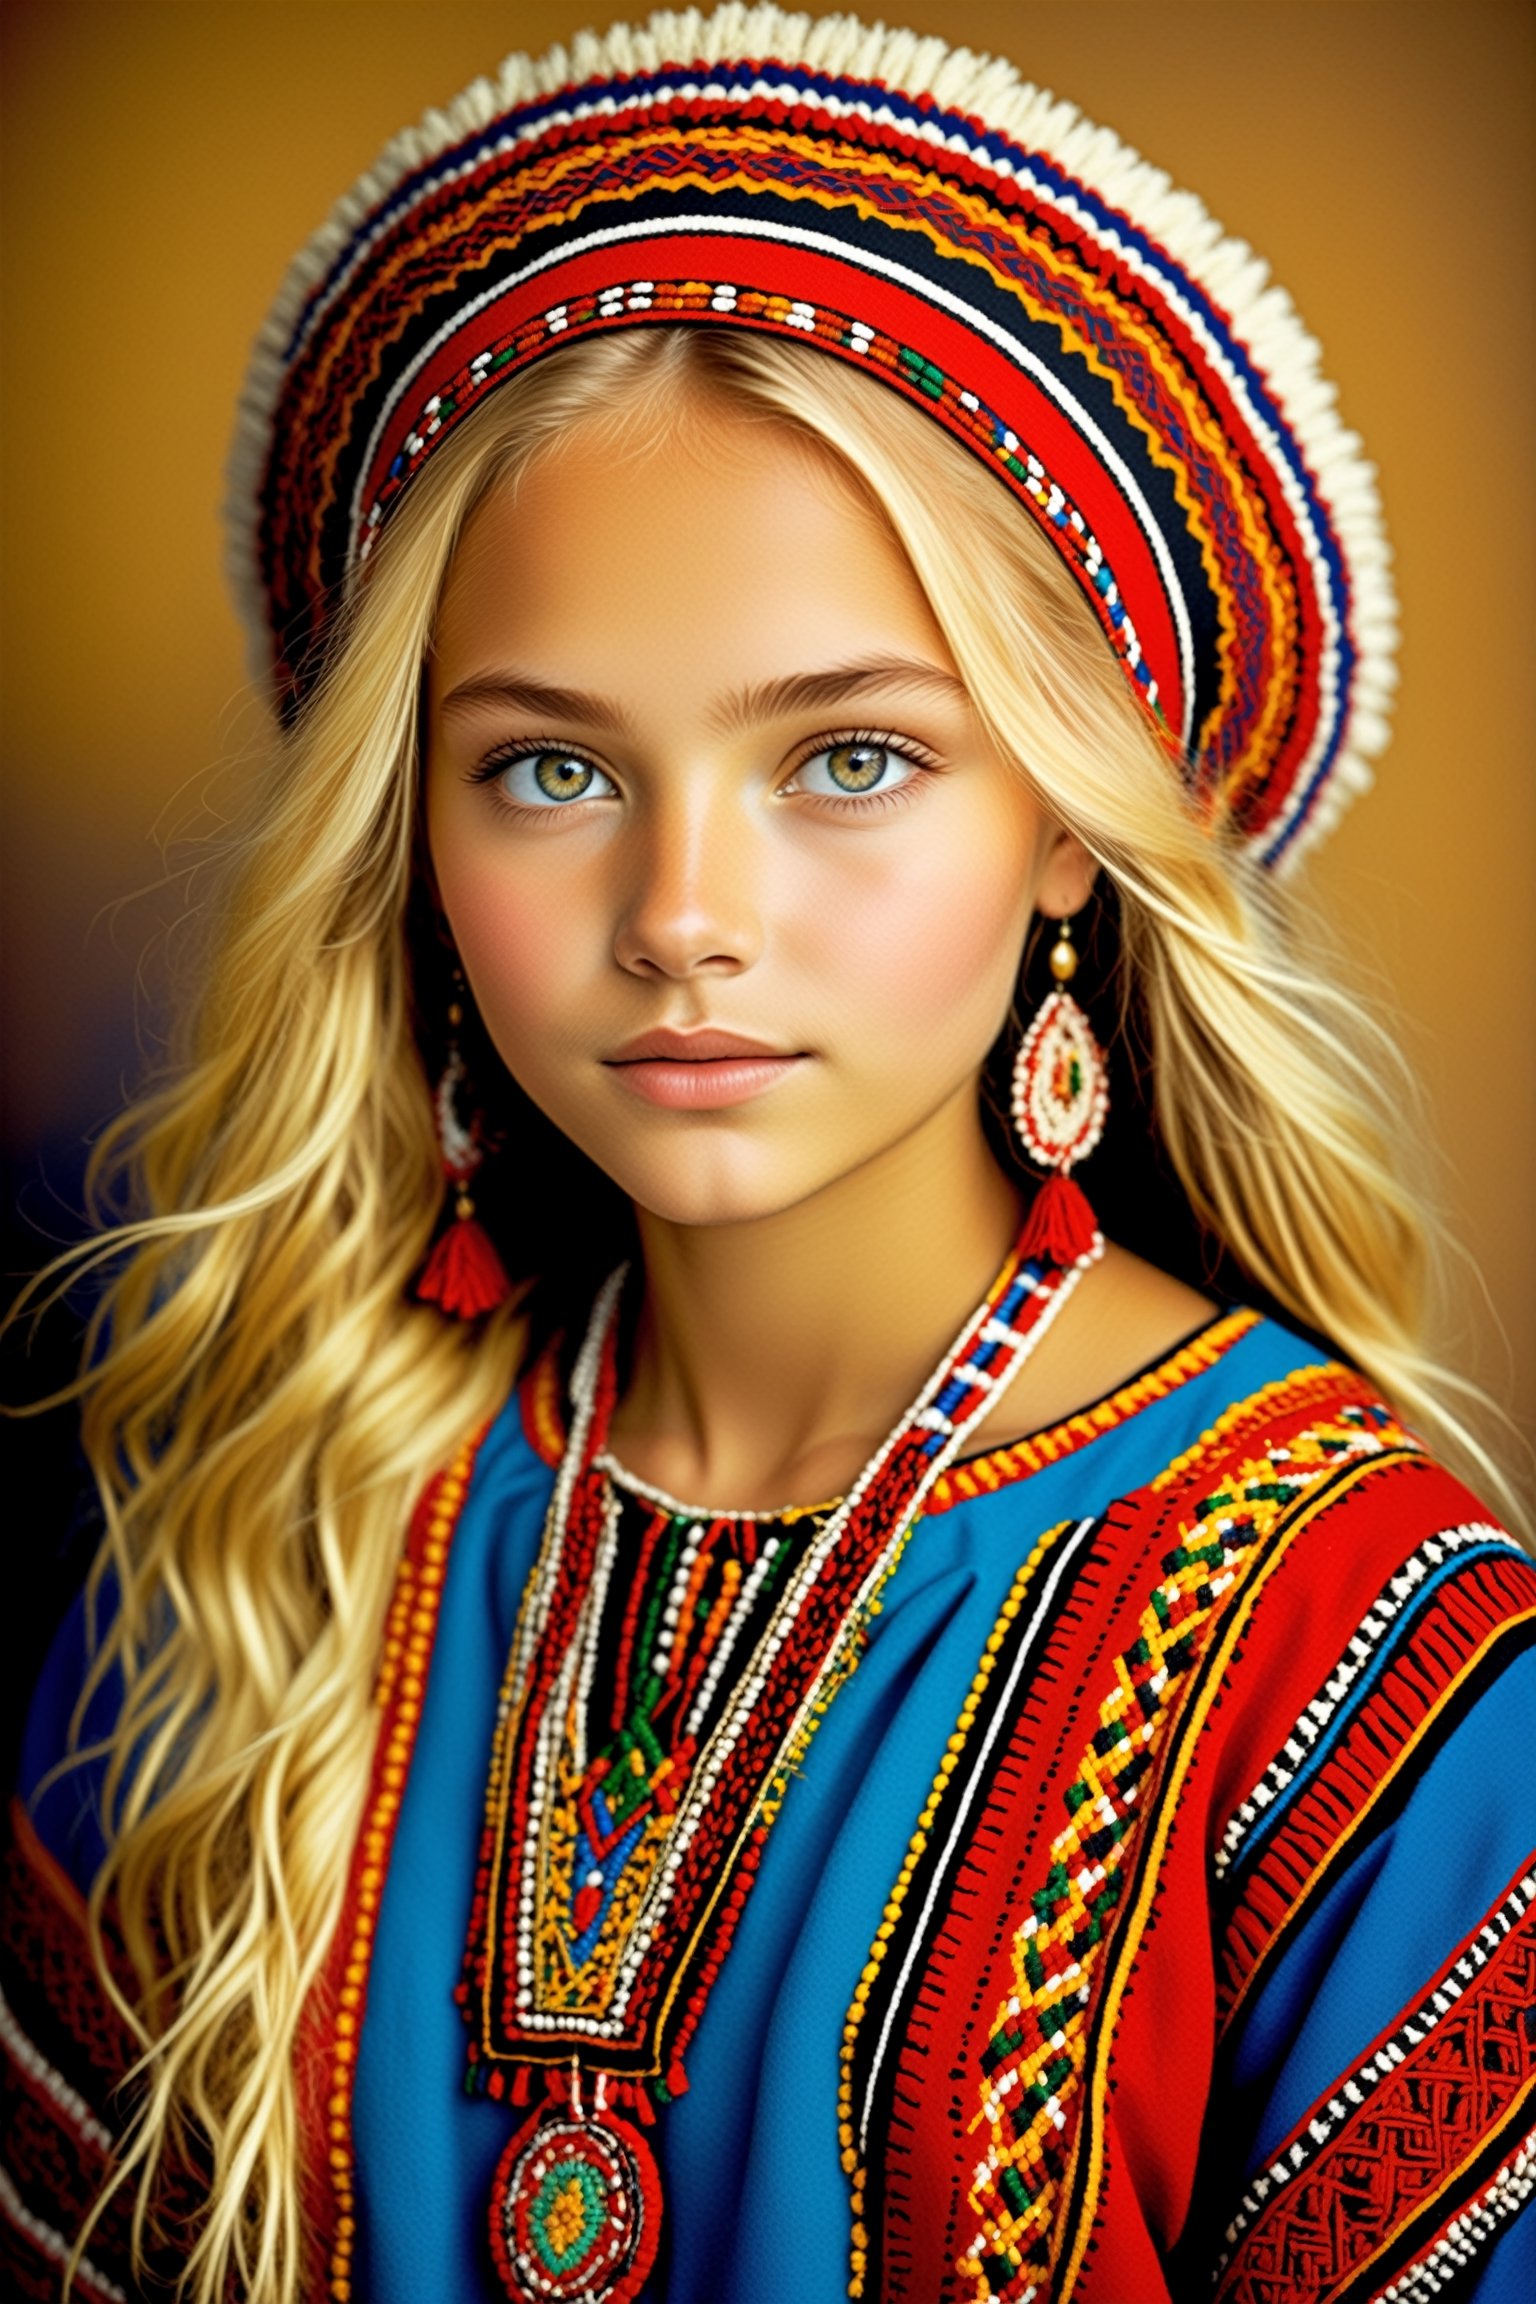  drop-dead gorgeous beautiful young girl,17 years old,highly clear face,very cute, Beautiful blonde hair,bright look,smooth curly hair,
adorned in traditional Sami clothing  kofte, representing the indigenous people of northern Europe,Her kofte intricately embroidered in vibrant colors, is complemented by traditional accessories such as a beaded belt and intricately woven headgear,,ol1v1adunne,photo_b00ster